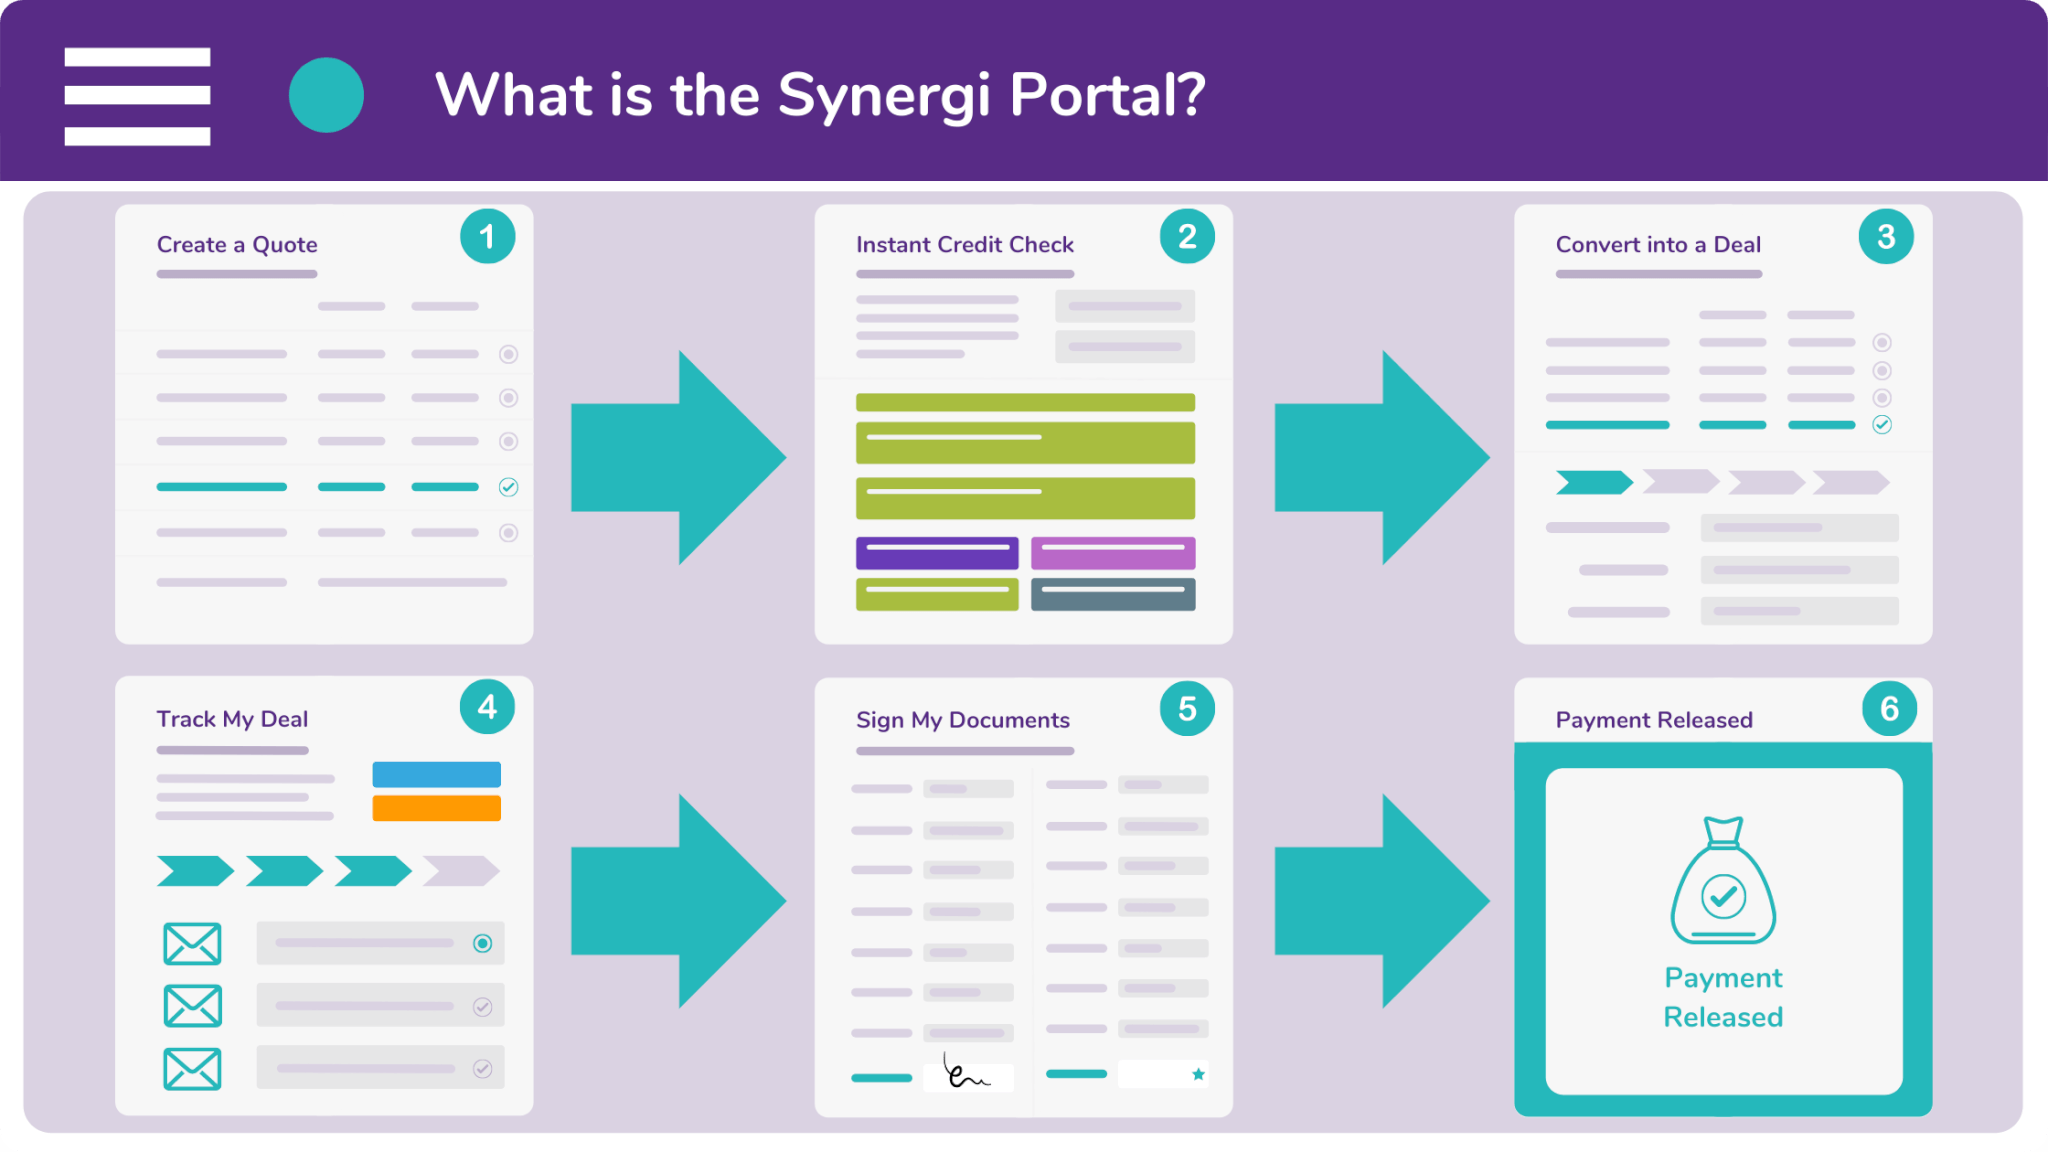 The Synergi Portal is a free sales enablement tool which allows you to quote, check, convert, and track.